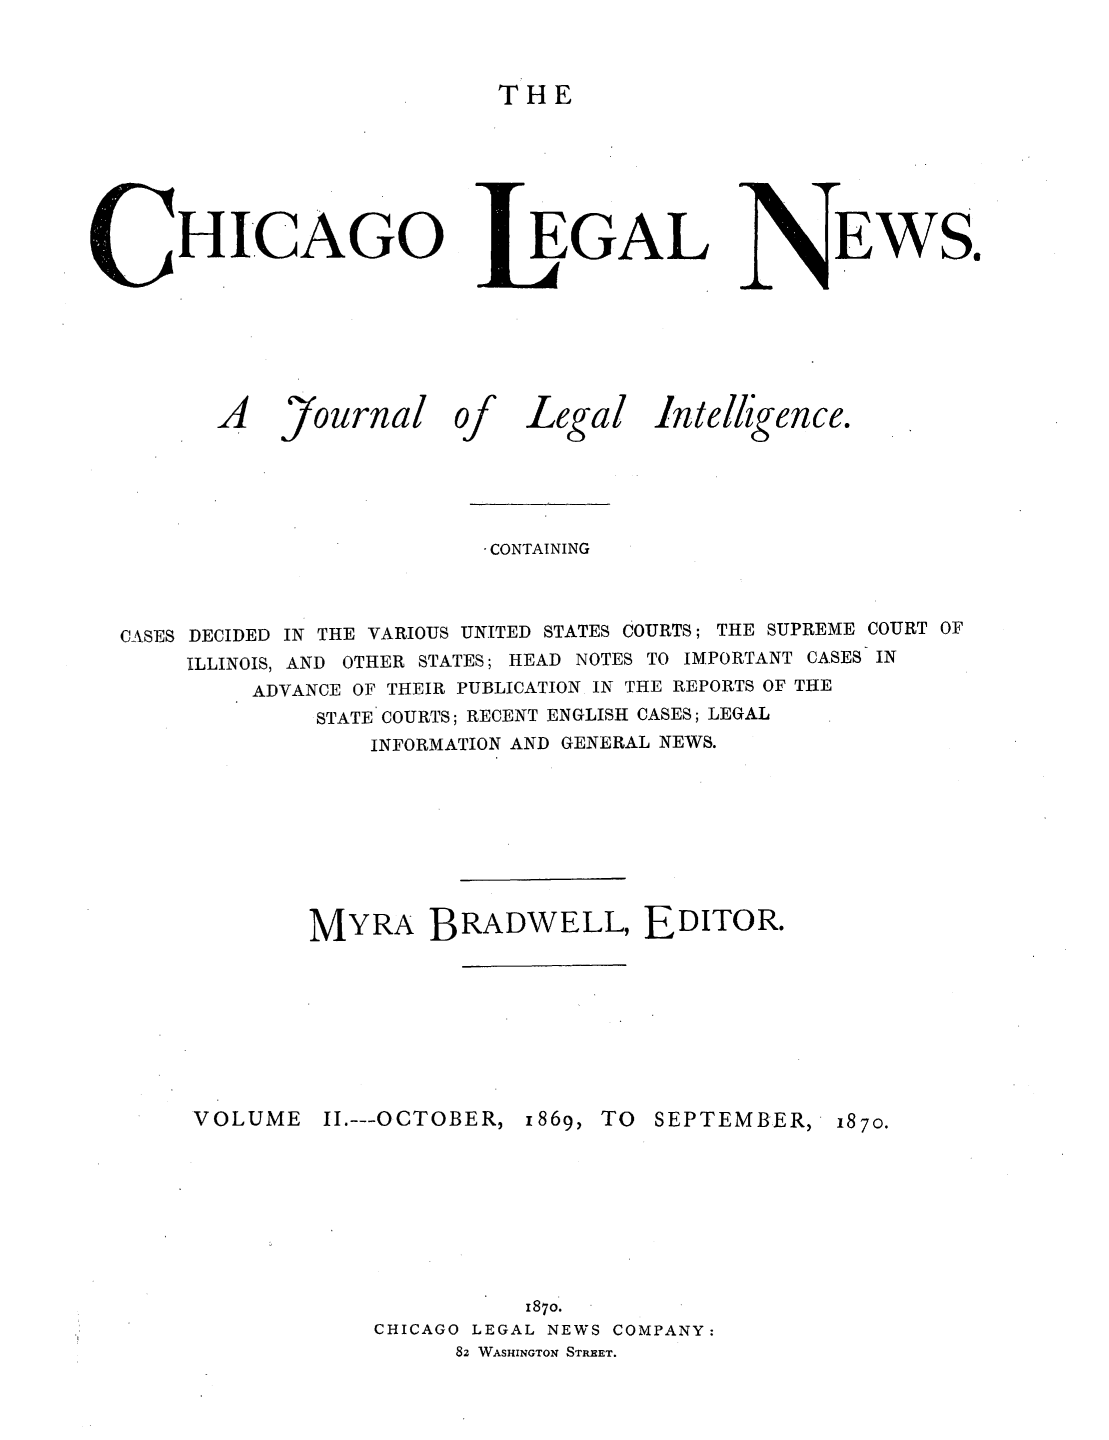 handle is hein.journals/chiclene2 and id is 1 raw text is: THECHICAGOAJournalofEGALLegal n,EWS.iligen cc.CONTAININGCASES DECIDED IN THE VARIOUS UNITED STATES COURTS; THE SUPREME COURT OFILLINOIS, AND OTHER STATES; HEAD NOTES TO IMPORTANT CASES INADVANCE OF THEIR PUBLICATION IN THE REPORTS OF THESTATE' COURTS; RECENT ENGLISH CASES; LEGALINFORMATION AND GENERAL NEWS.MYRA BRADWELL, EDITOR.VOLUME II.---OCTOBER, 1869, TO SEPTEMBER,1870.1870.CHICAGO LEGAL NEWS COMPANY:82 WASHINGTON STREET.